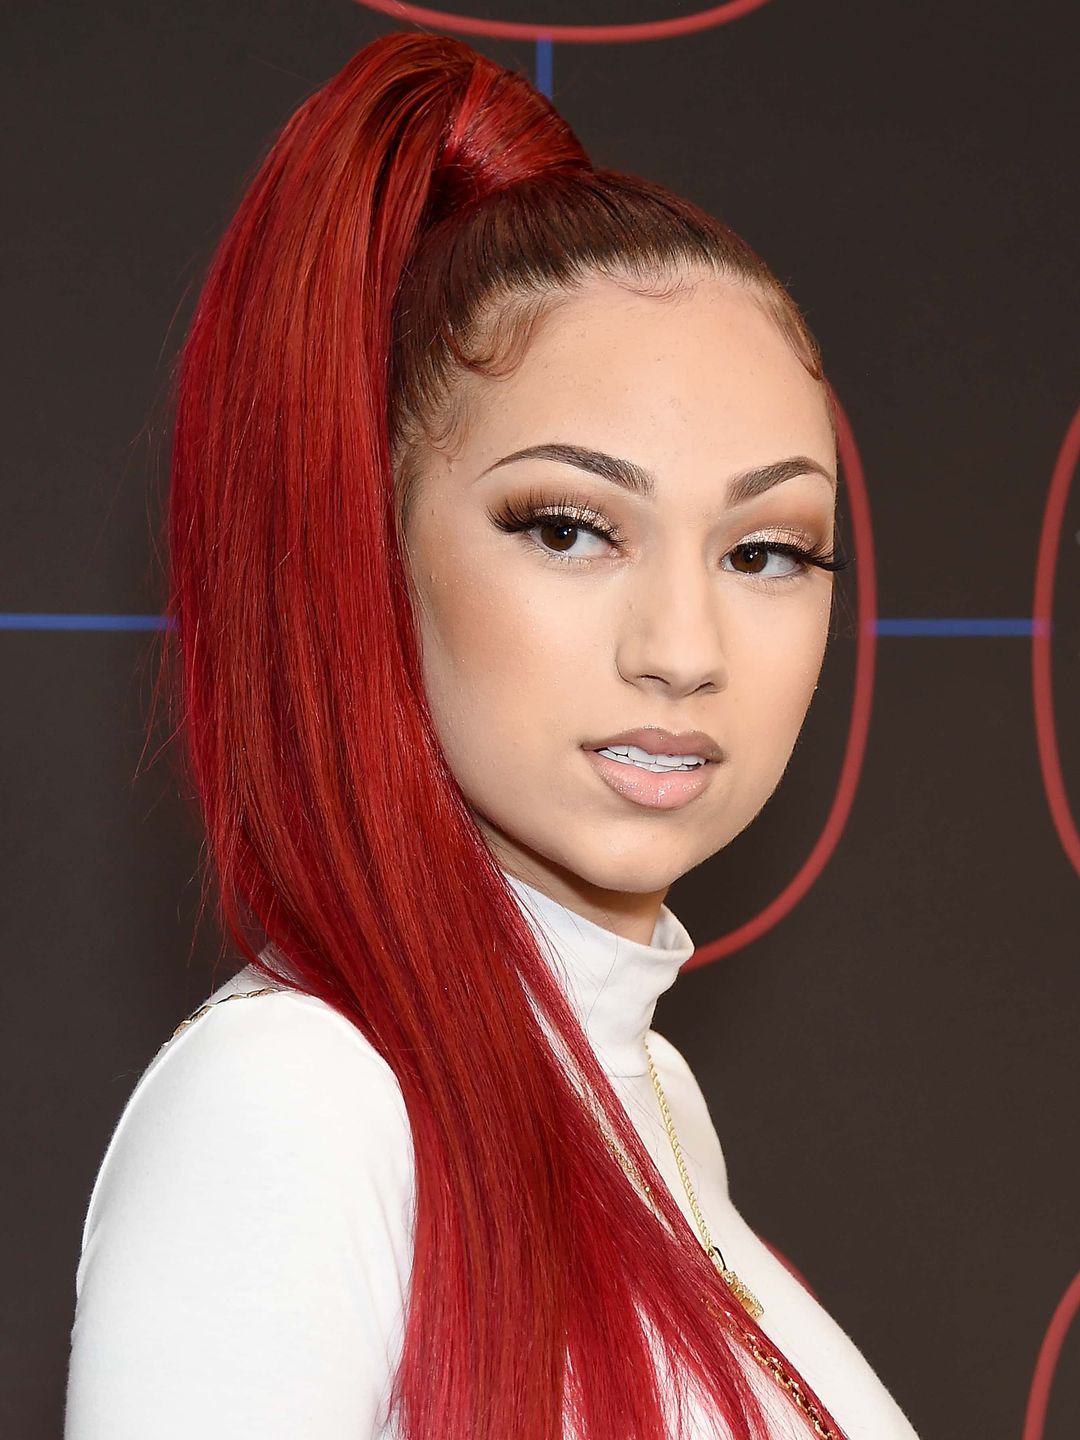 Danielle Bregoli how did she became famous